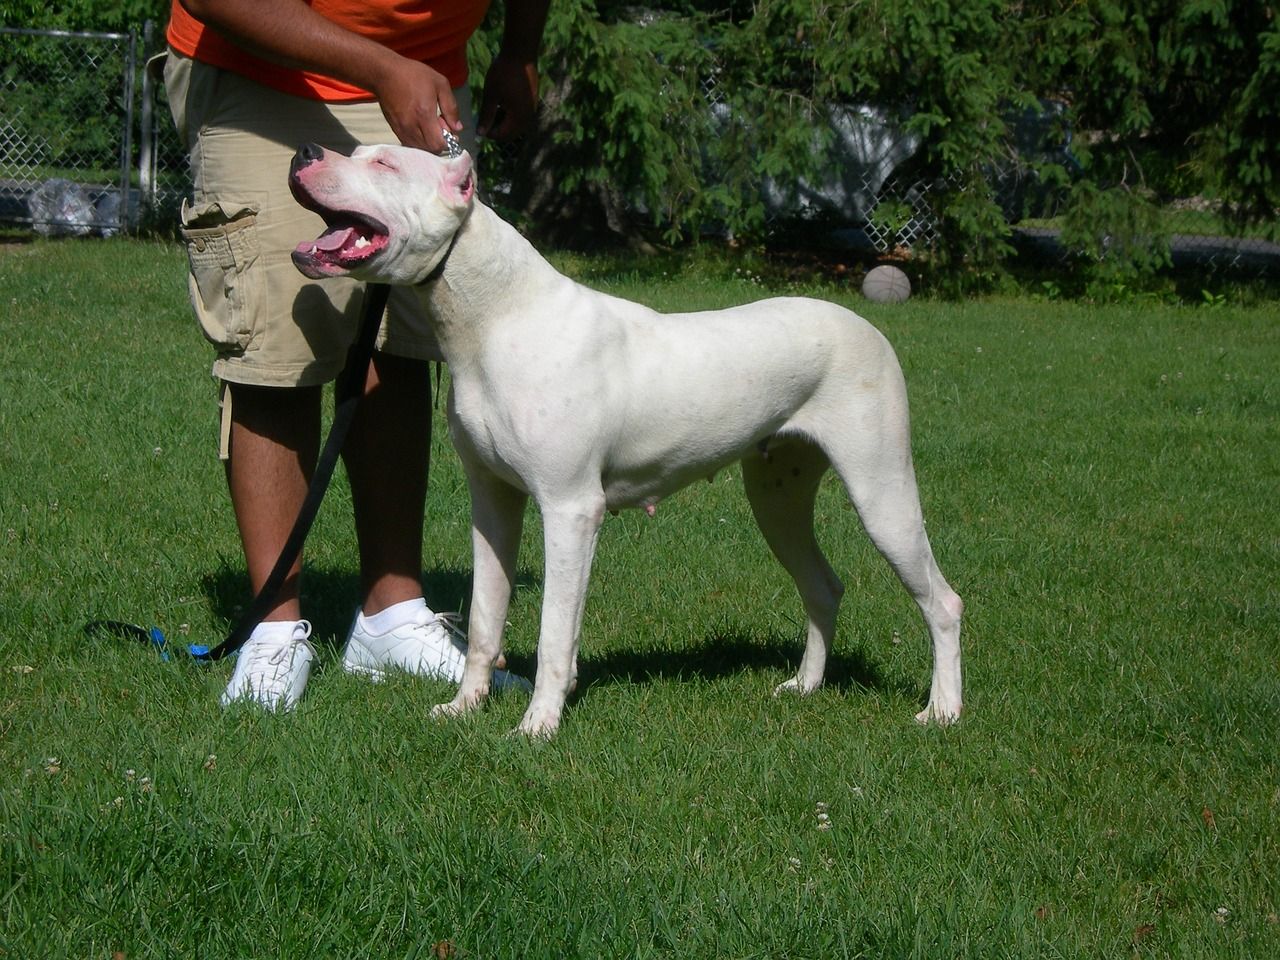 Dogo Argentino And Argentine Dogo: Dogo Argentino Complete Guide